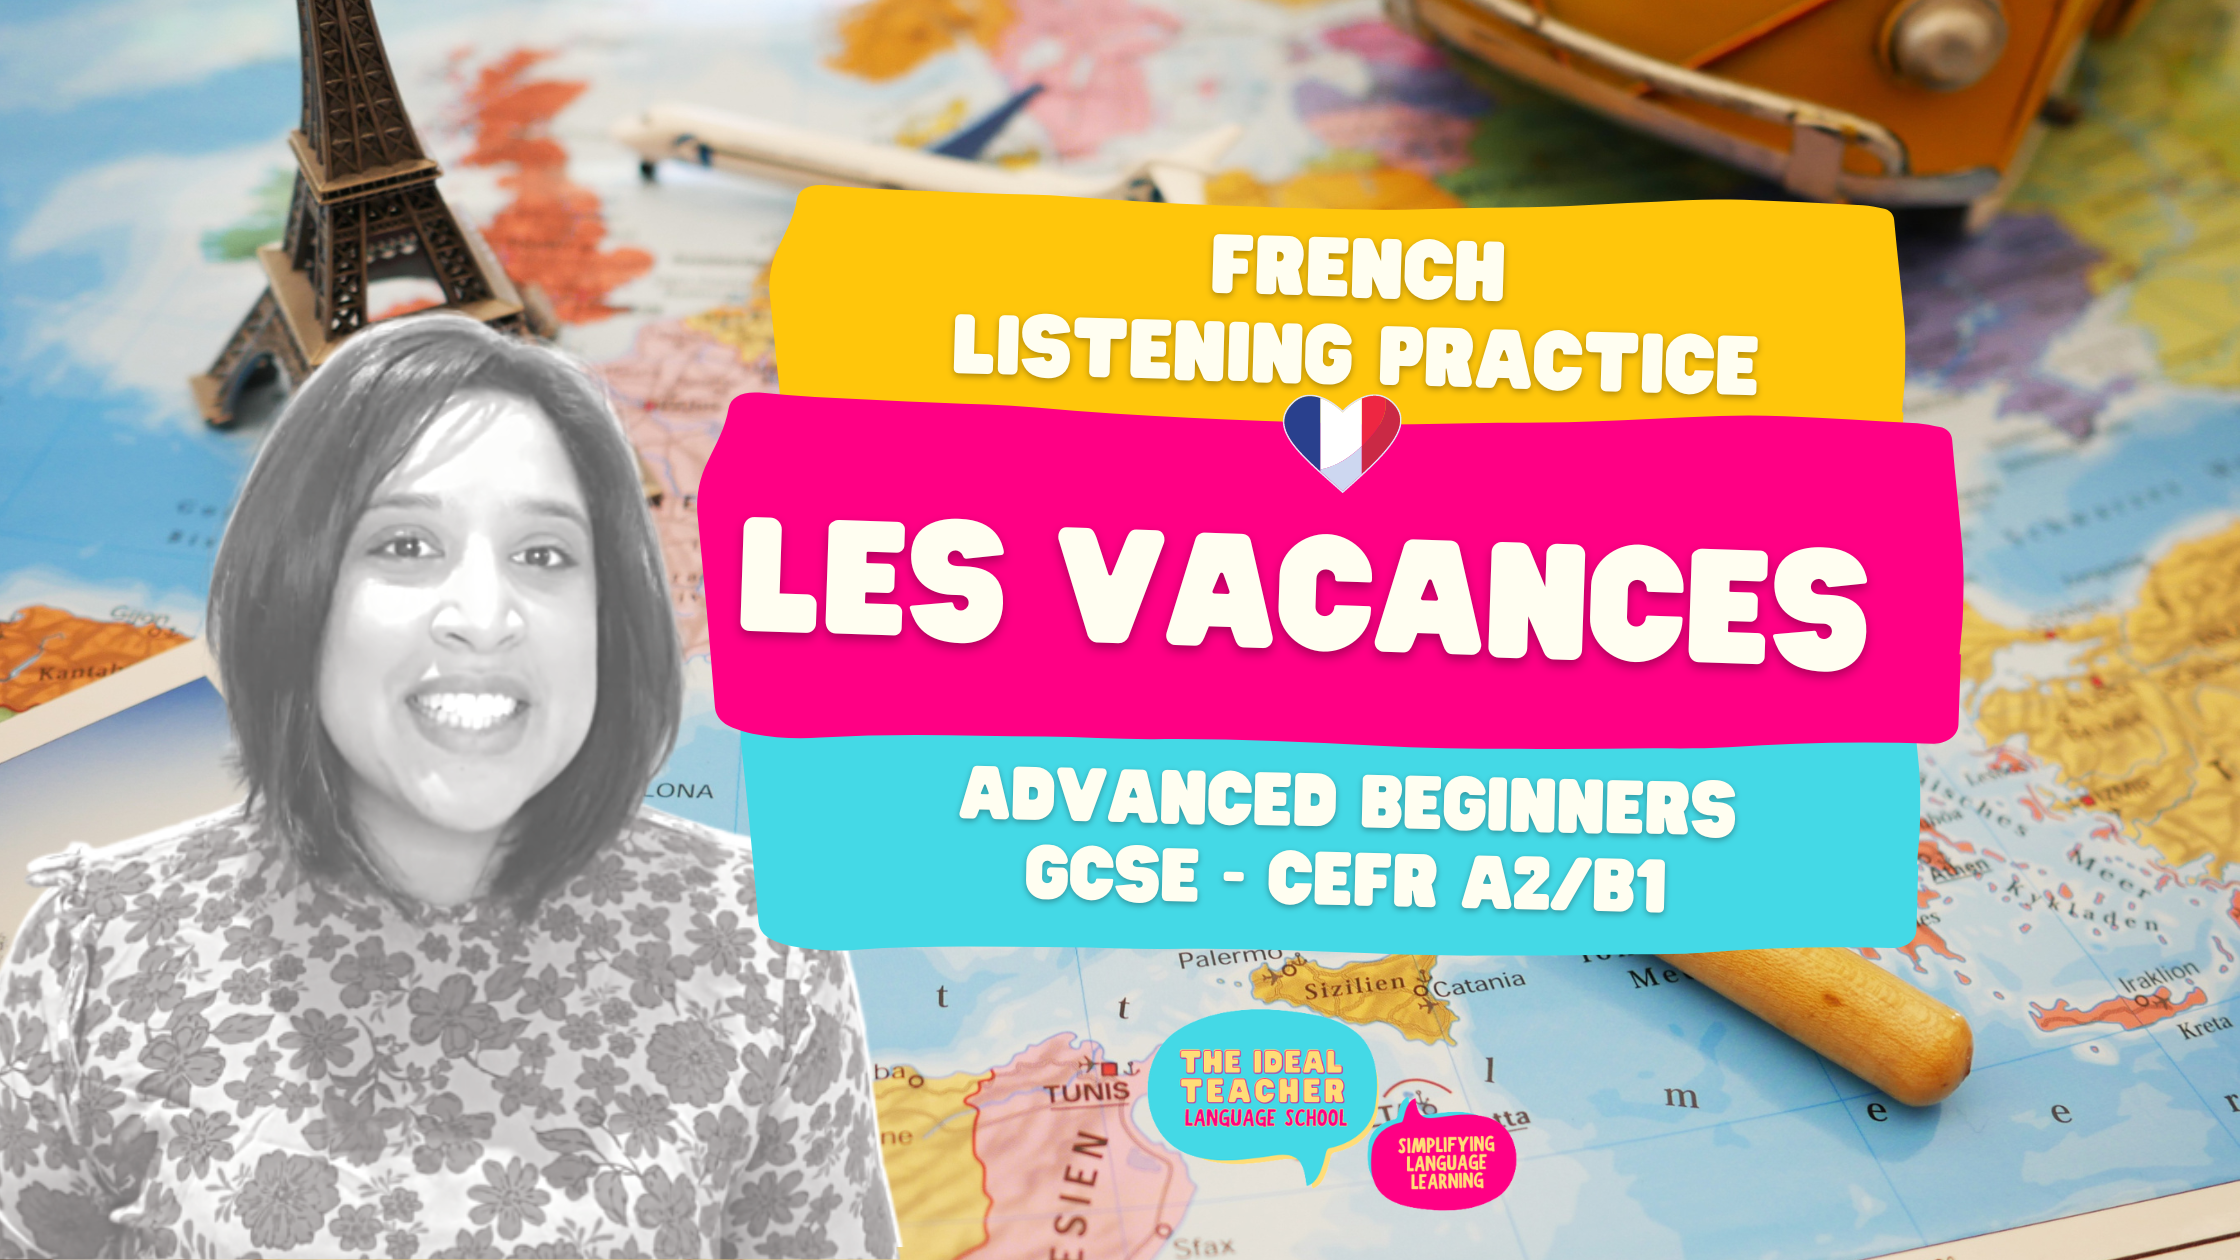 Les Vacances – Free French Listening Practice for A2 and GCSE